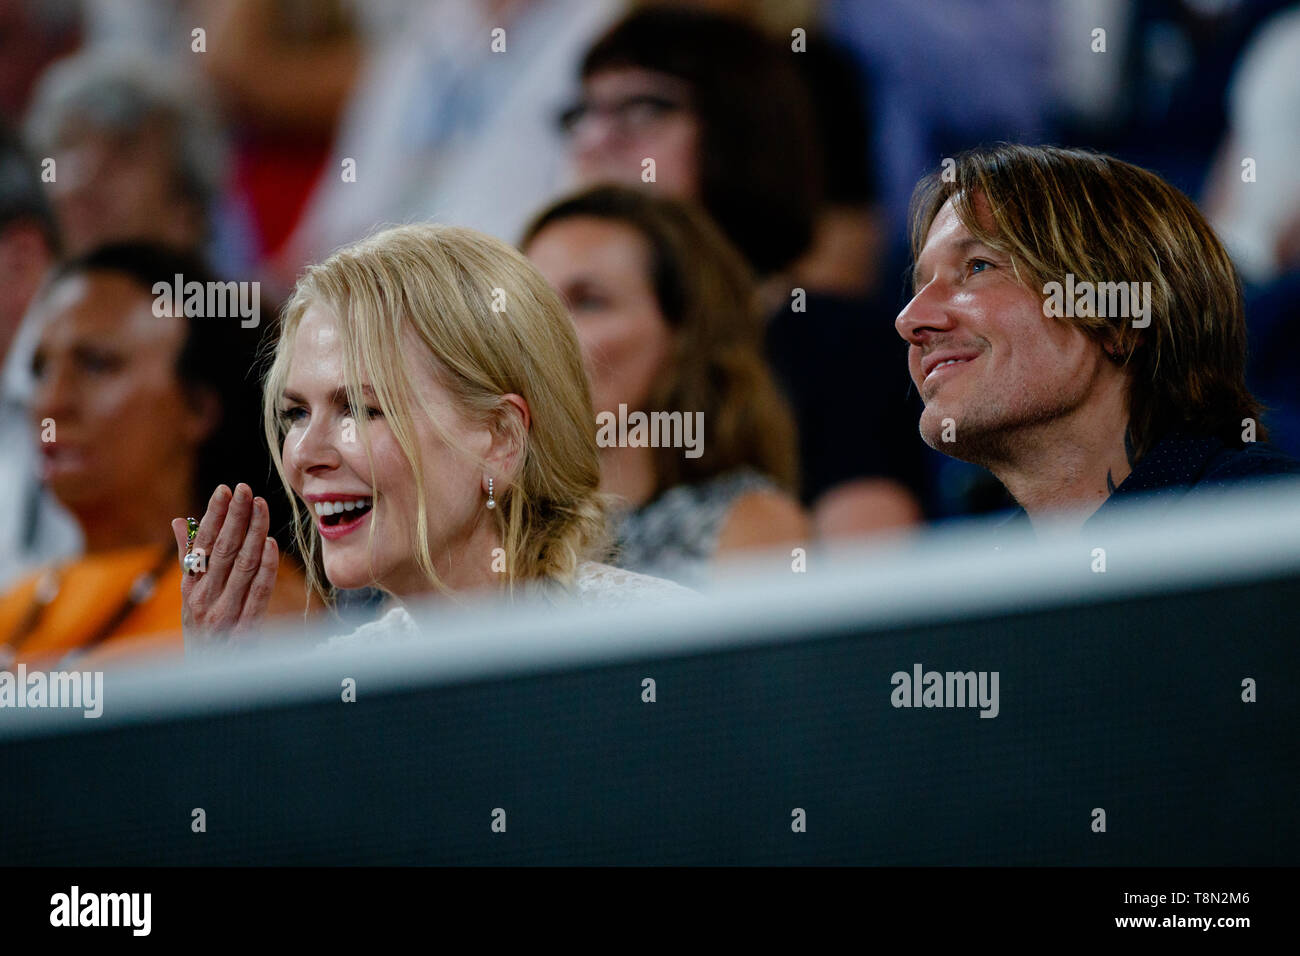 Nicole Kidman with husband Keith Urban watching a match on center court at the 2019 Australian Open. Stock Photo